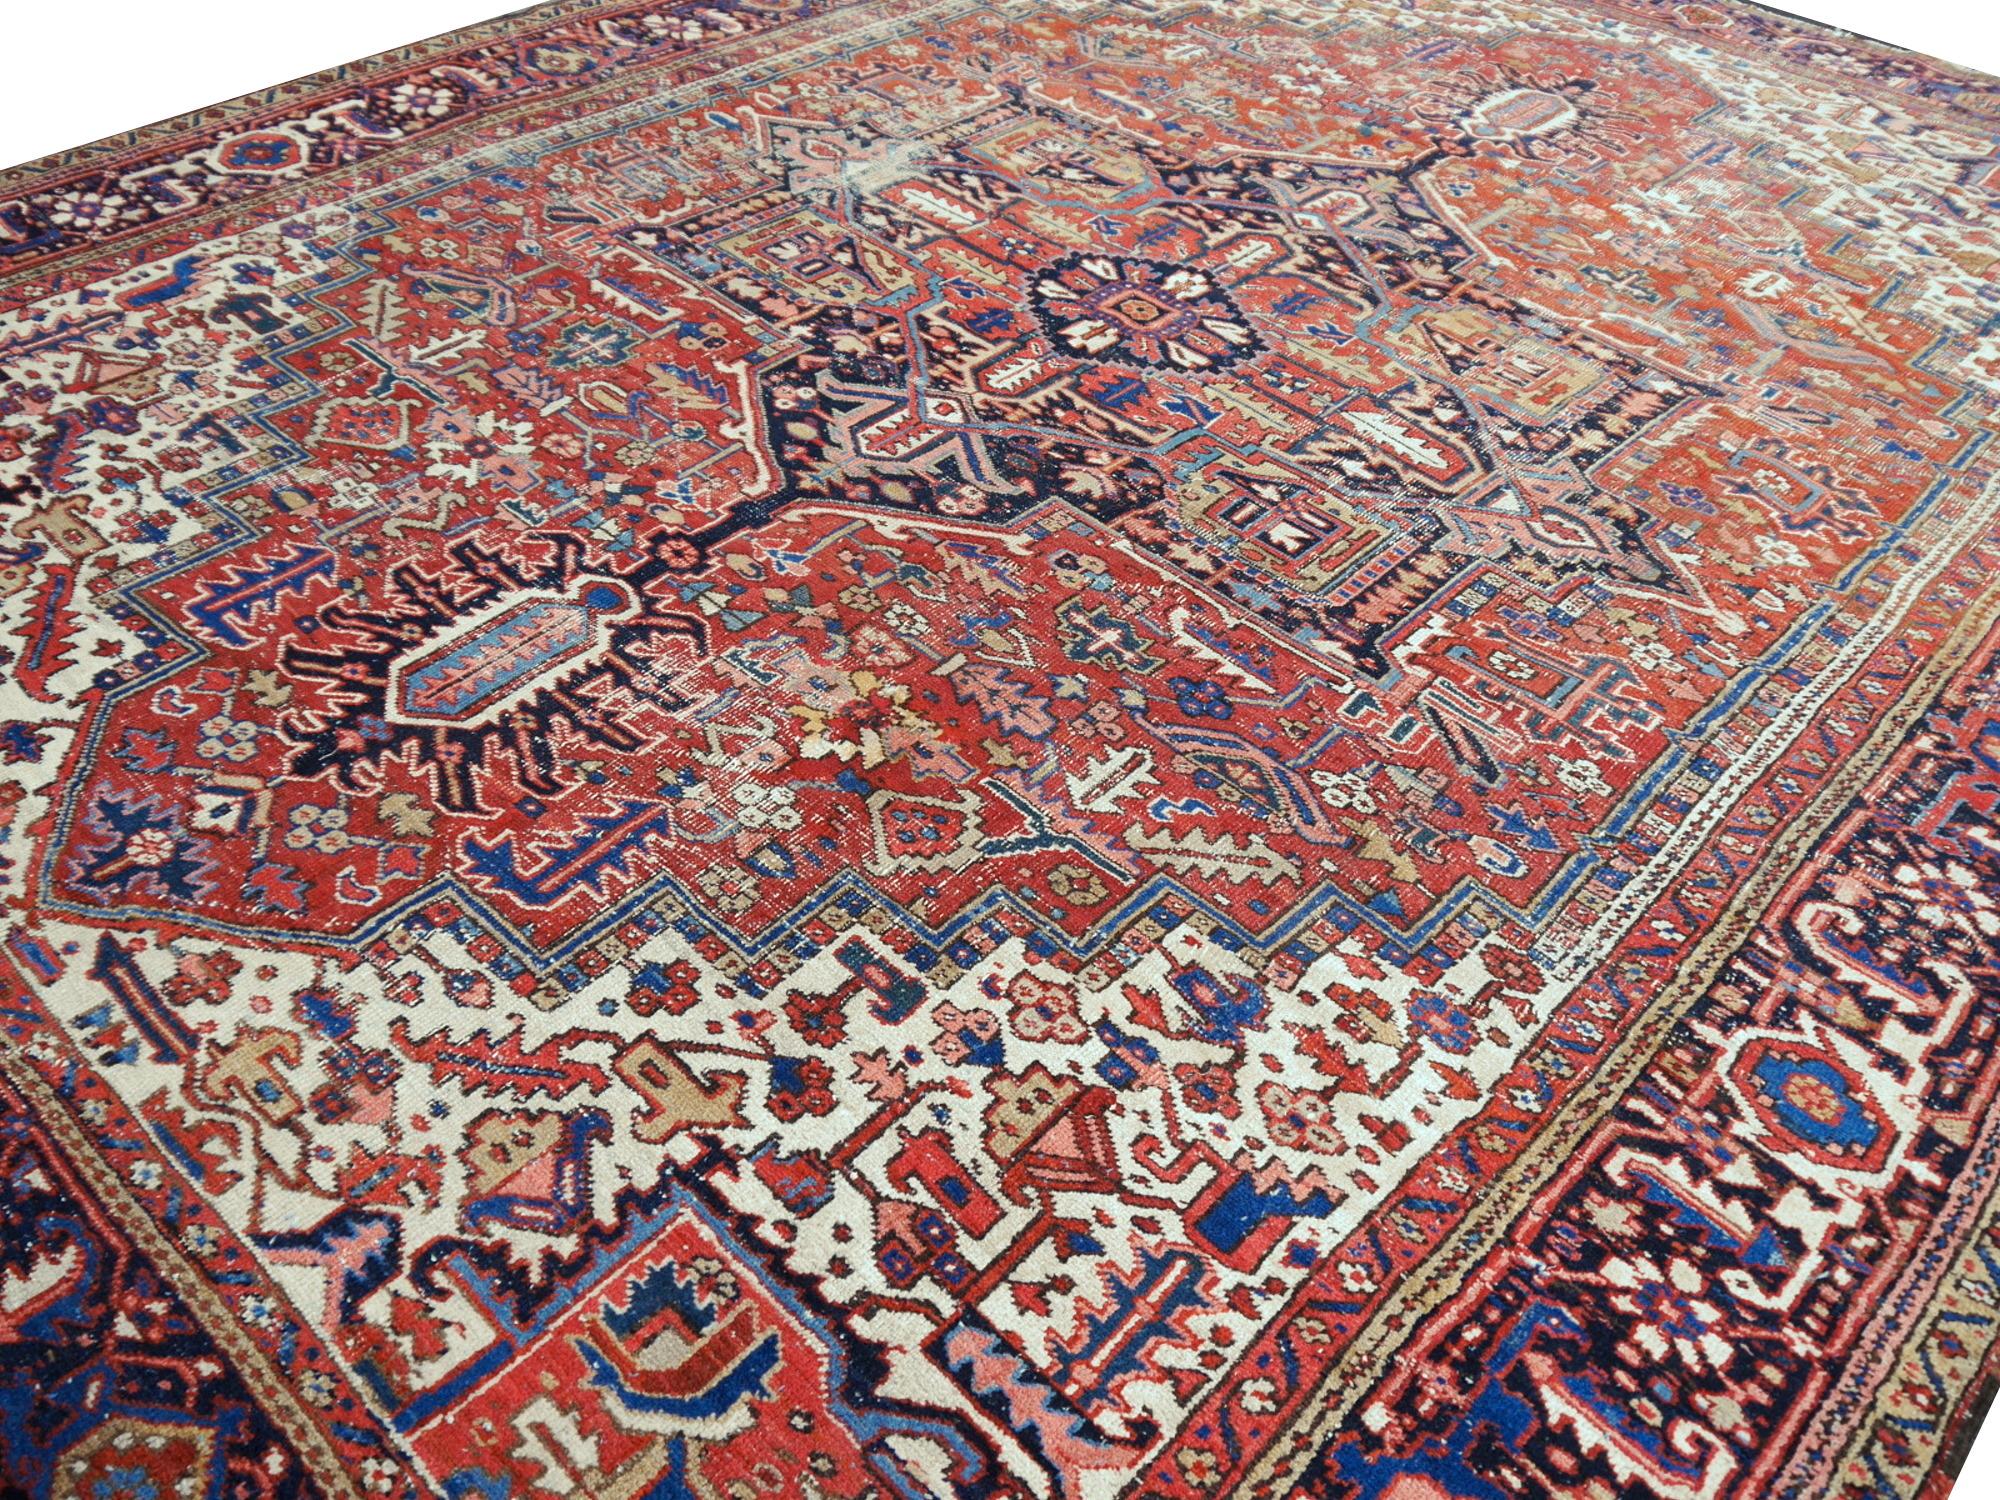 Azerbaijani Antique Heriz Rug 10x13 ft Distressed Classic Vintage Carpet worn to perfection For Sale